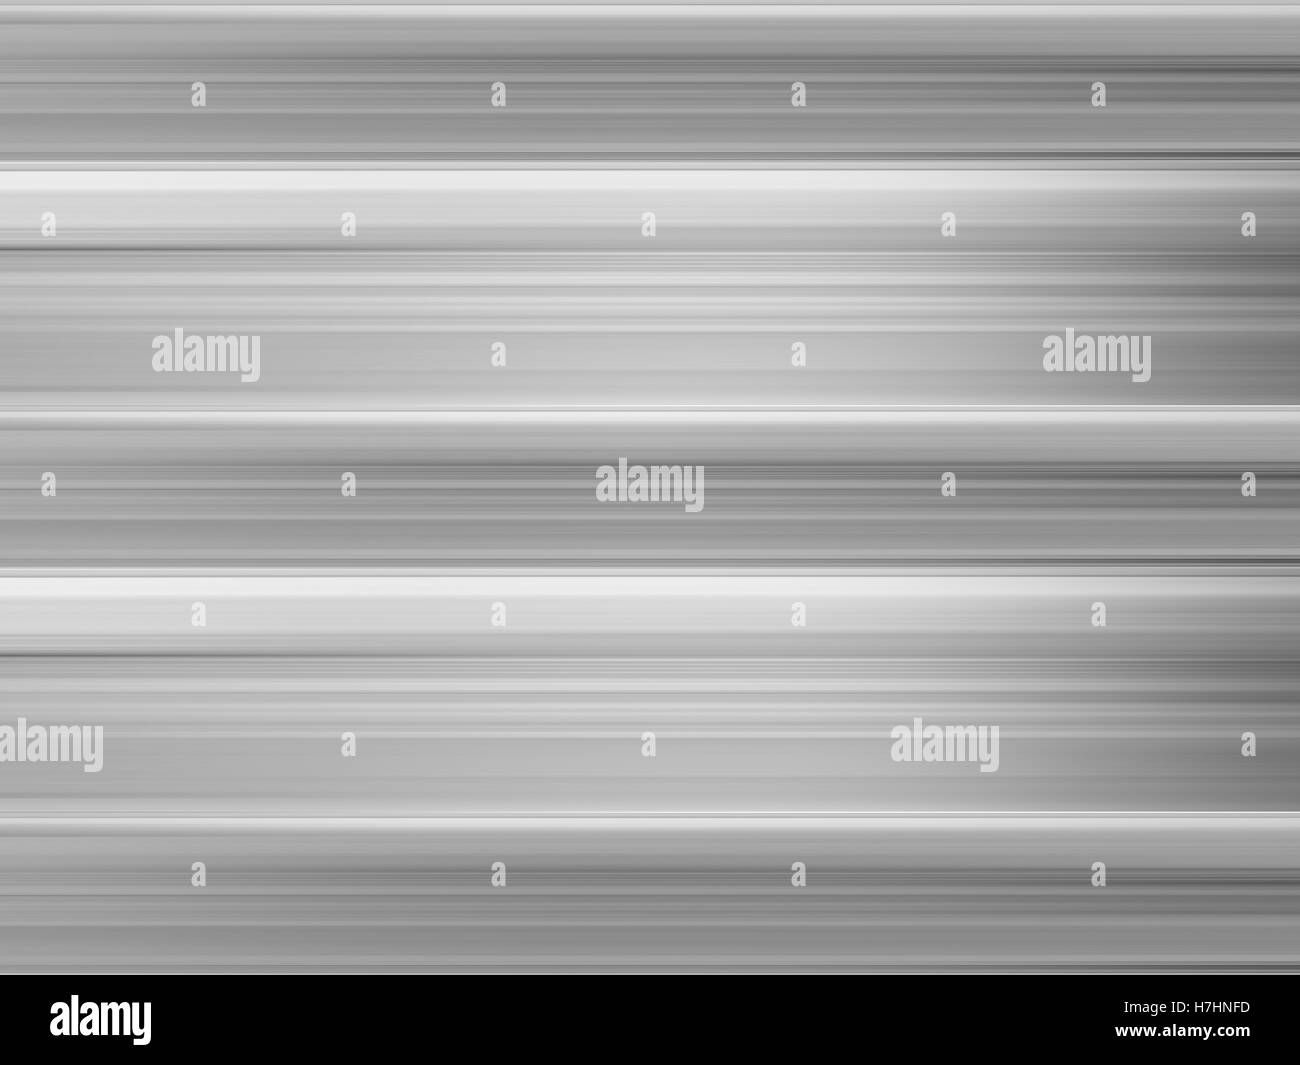 Abstract background blur motion black and white stripes Stock Photo